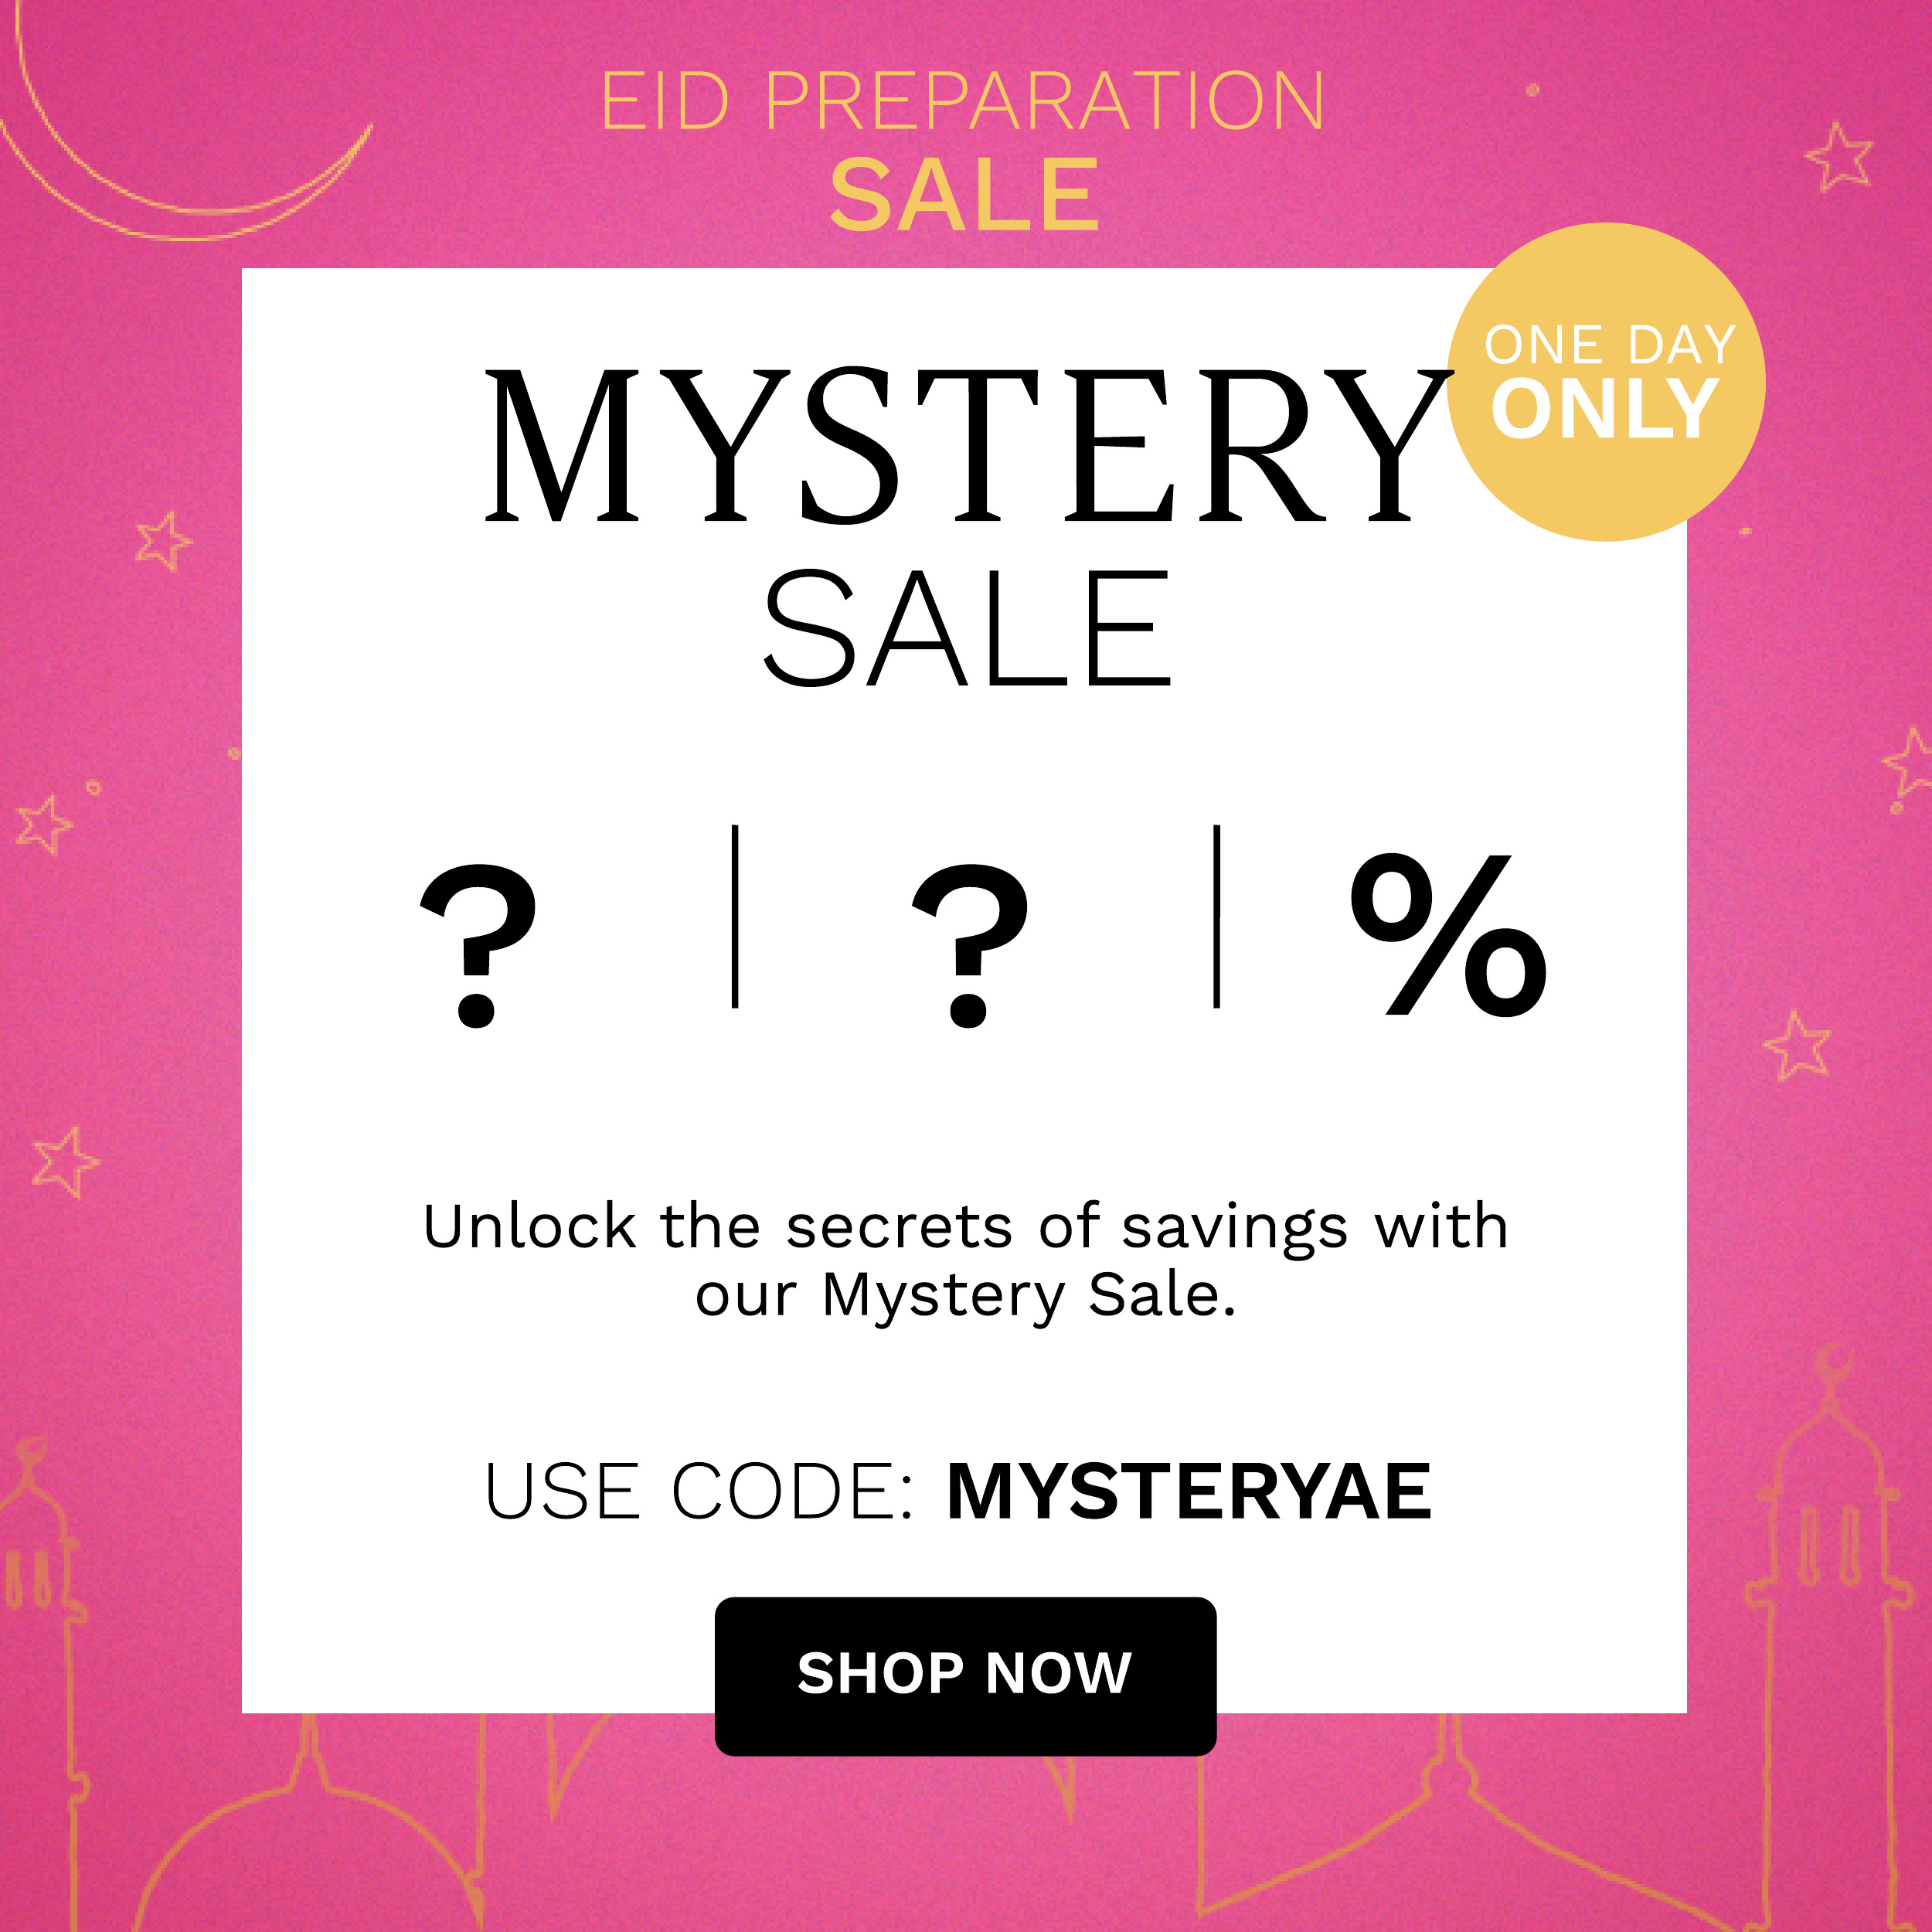 MYSTERY SALE 2 ? % Unlock the secrets of savings with our Mystery Sale. USE CODE: MYSTERYAE SHOP NOW 